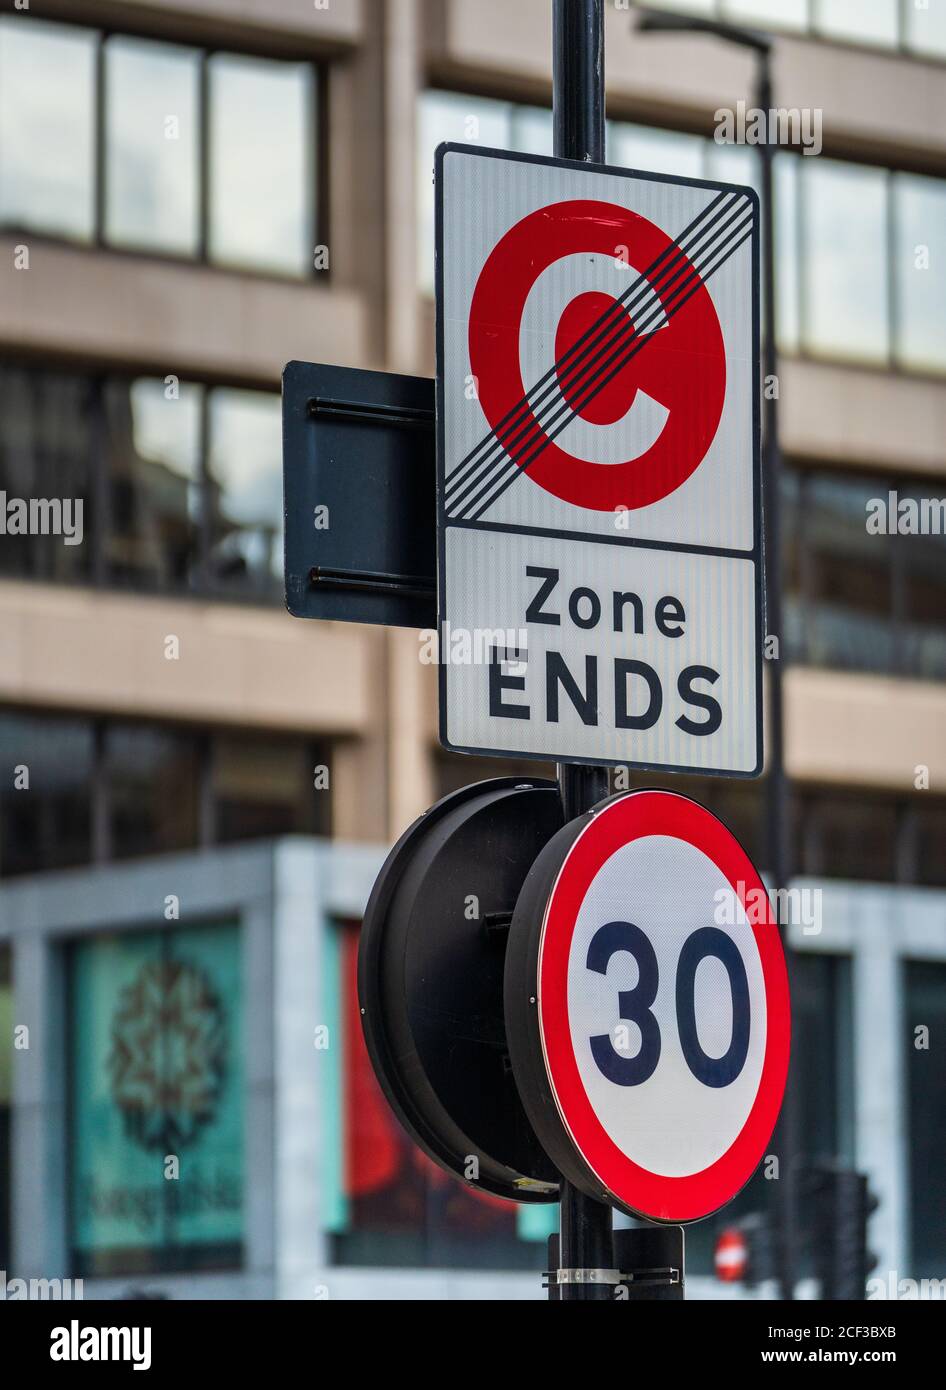 Congestion Charge Zone ends sign in Whitechapel London. The Congestion Charge Zone was introduced in 2003 in Central London to reduce traffic levels. Stock Photo